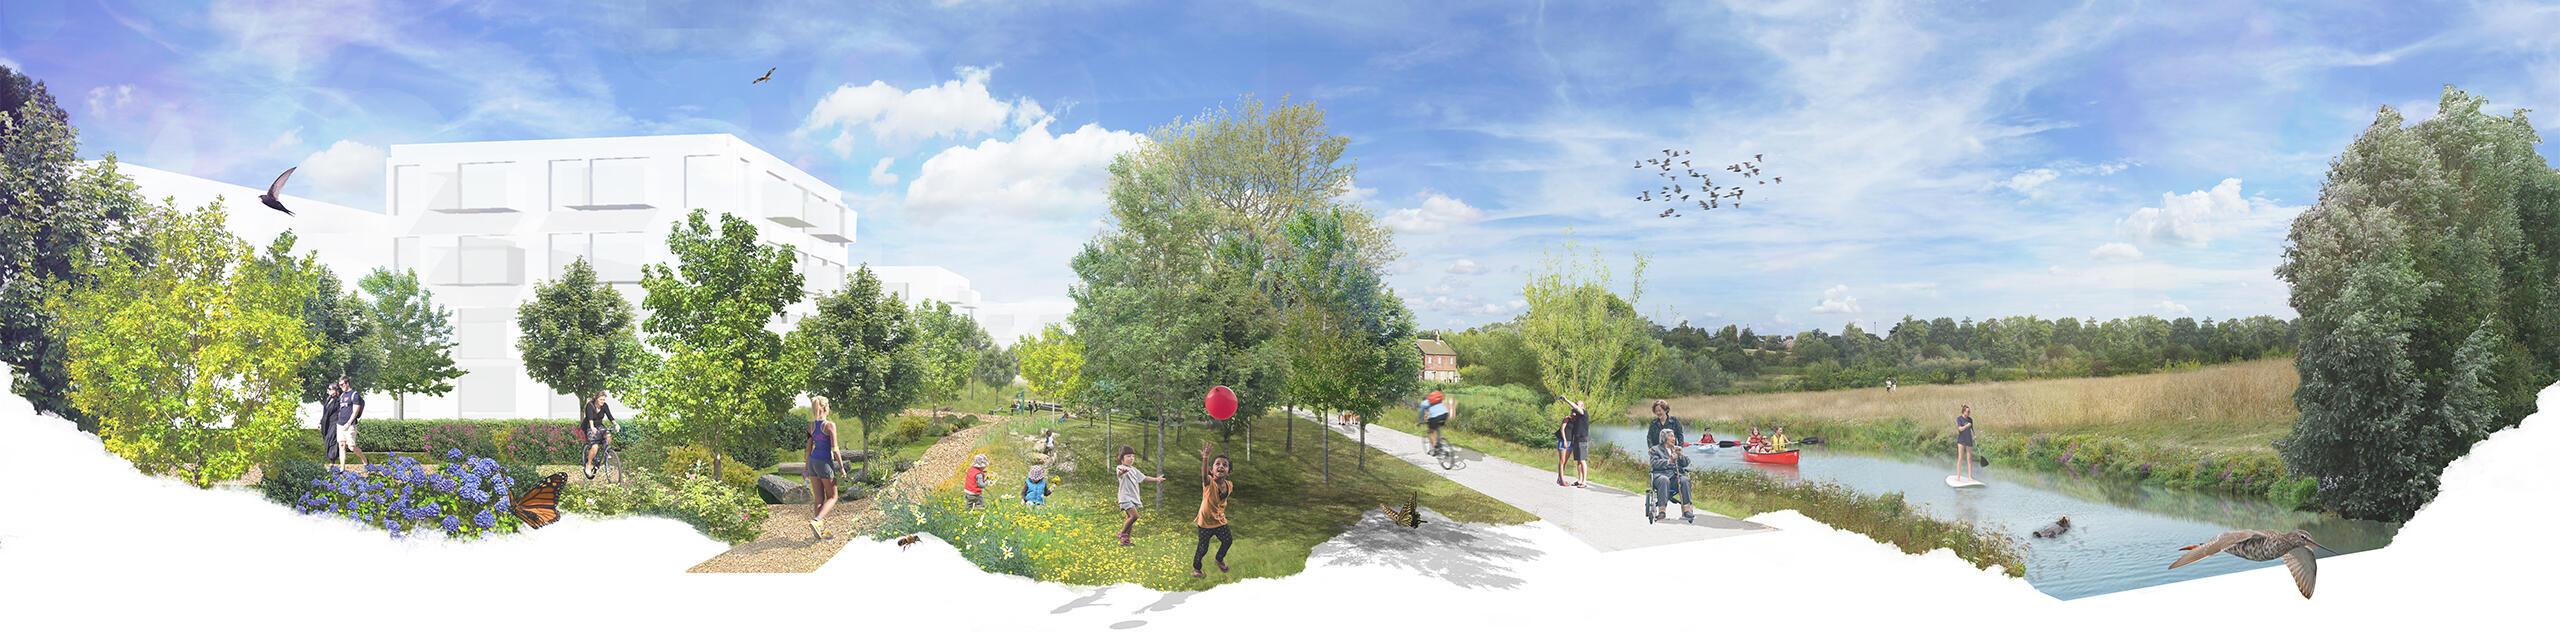 A photomontage showing how the proposed development and riverside park will enhance and connect to the river Wey. © JTP